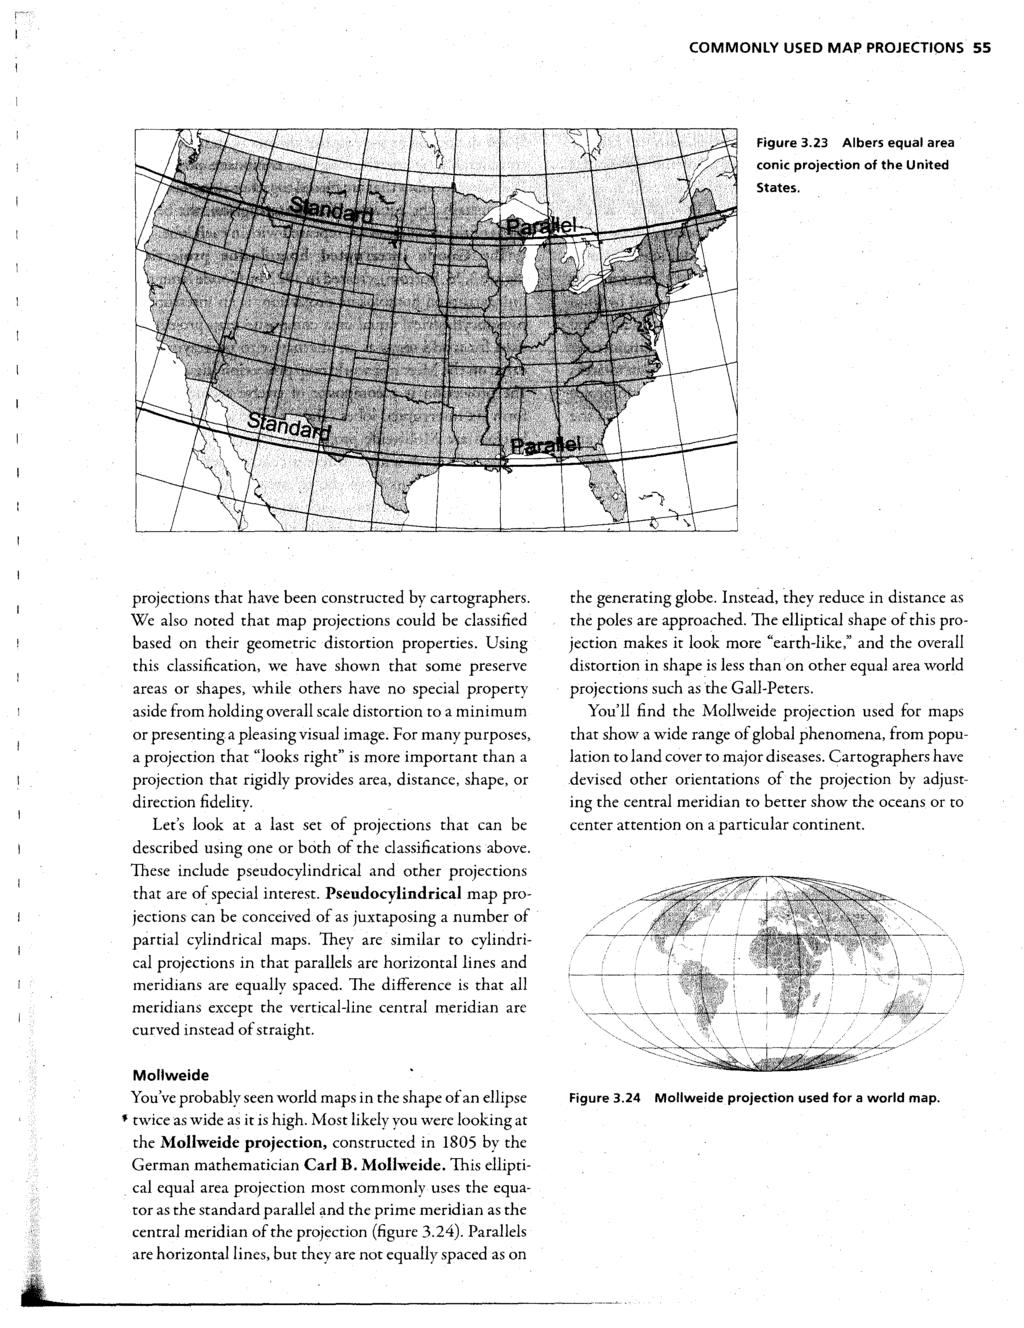 COMMONLY USED MAP PROJECTIONS 55 Figure 3.23 Albers equal area conic projection of the United States. projections that have been constructed by cartographers.